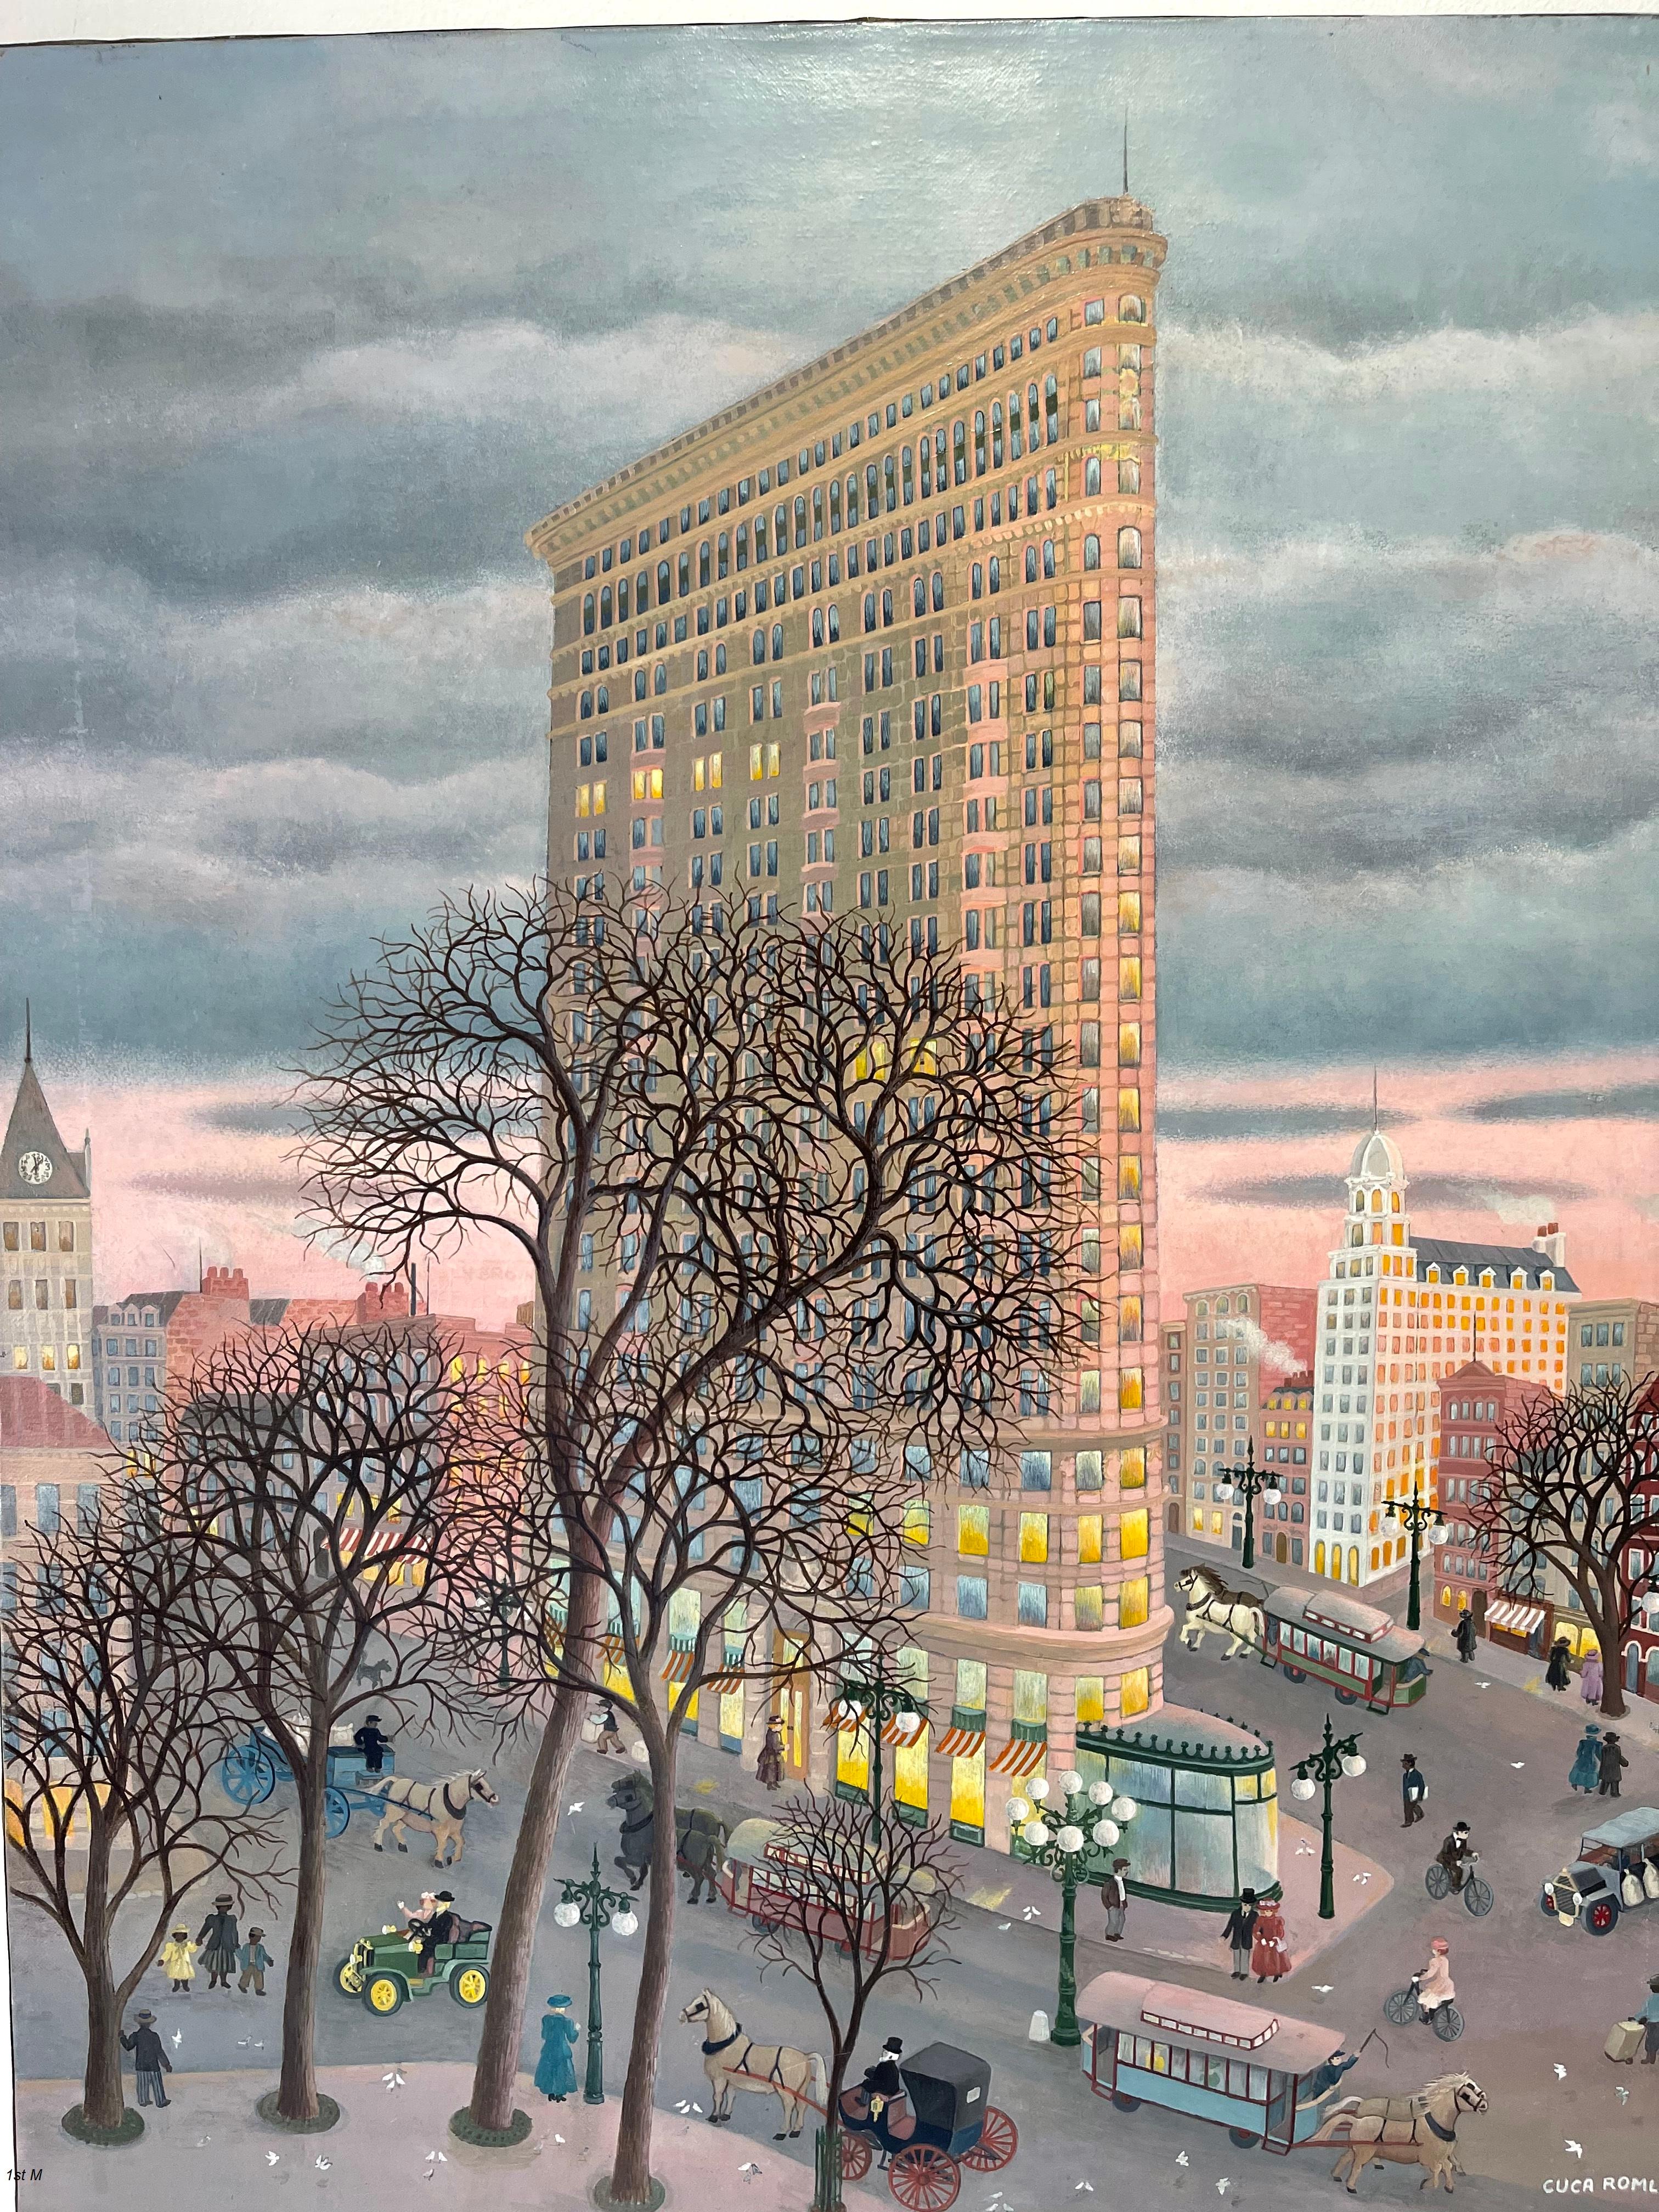 Cuca Romley Landscape Painting - The Flatiron Building  24”x36” Oil on canvas 